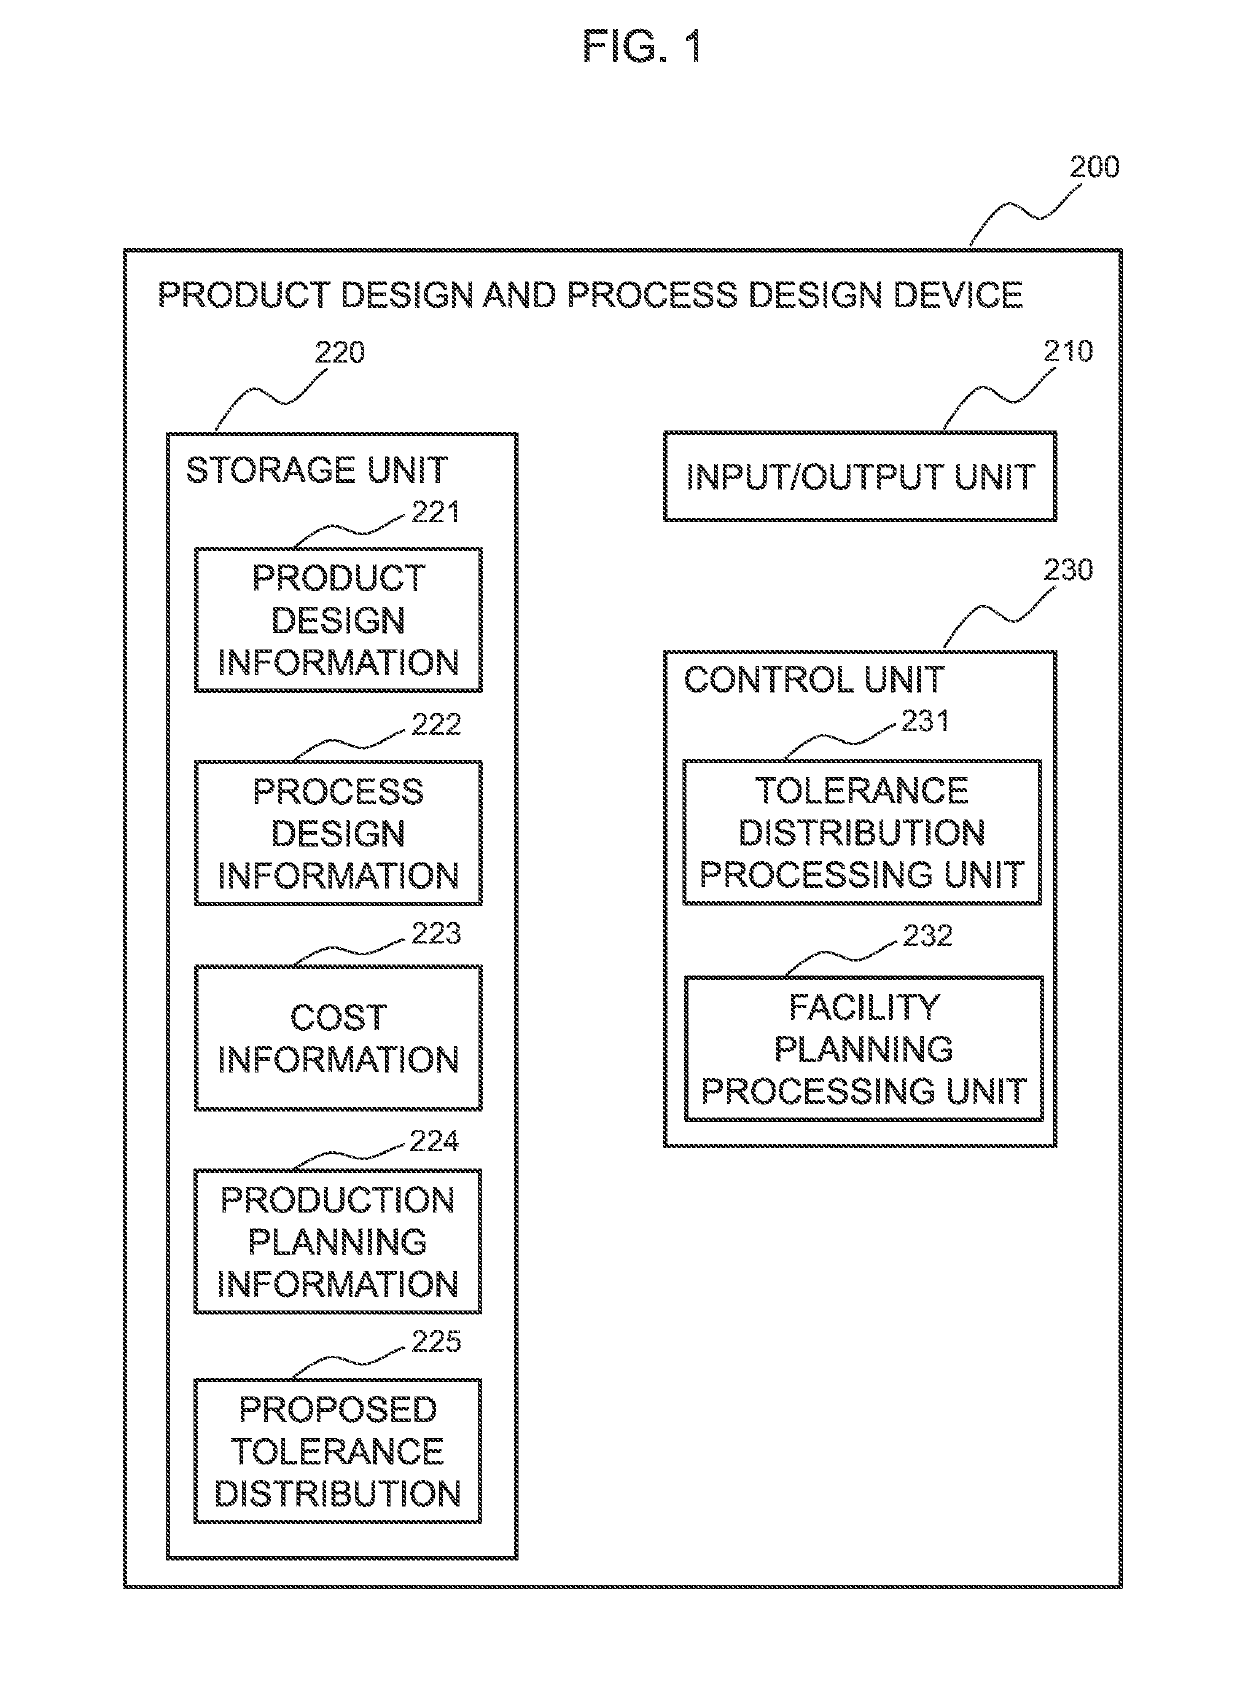 Product design and process design device